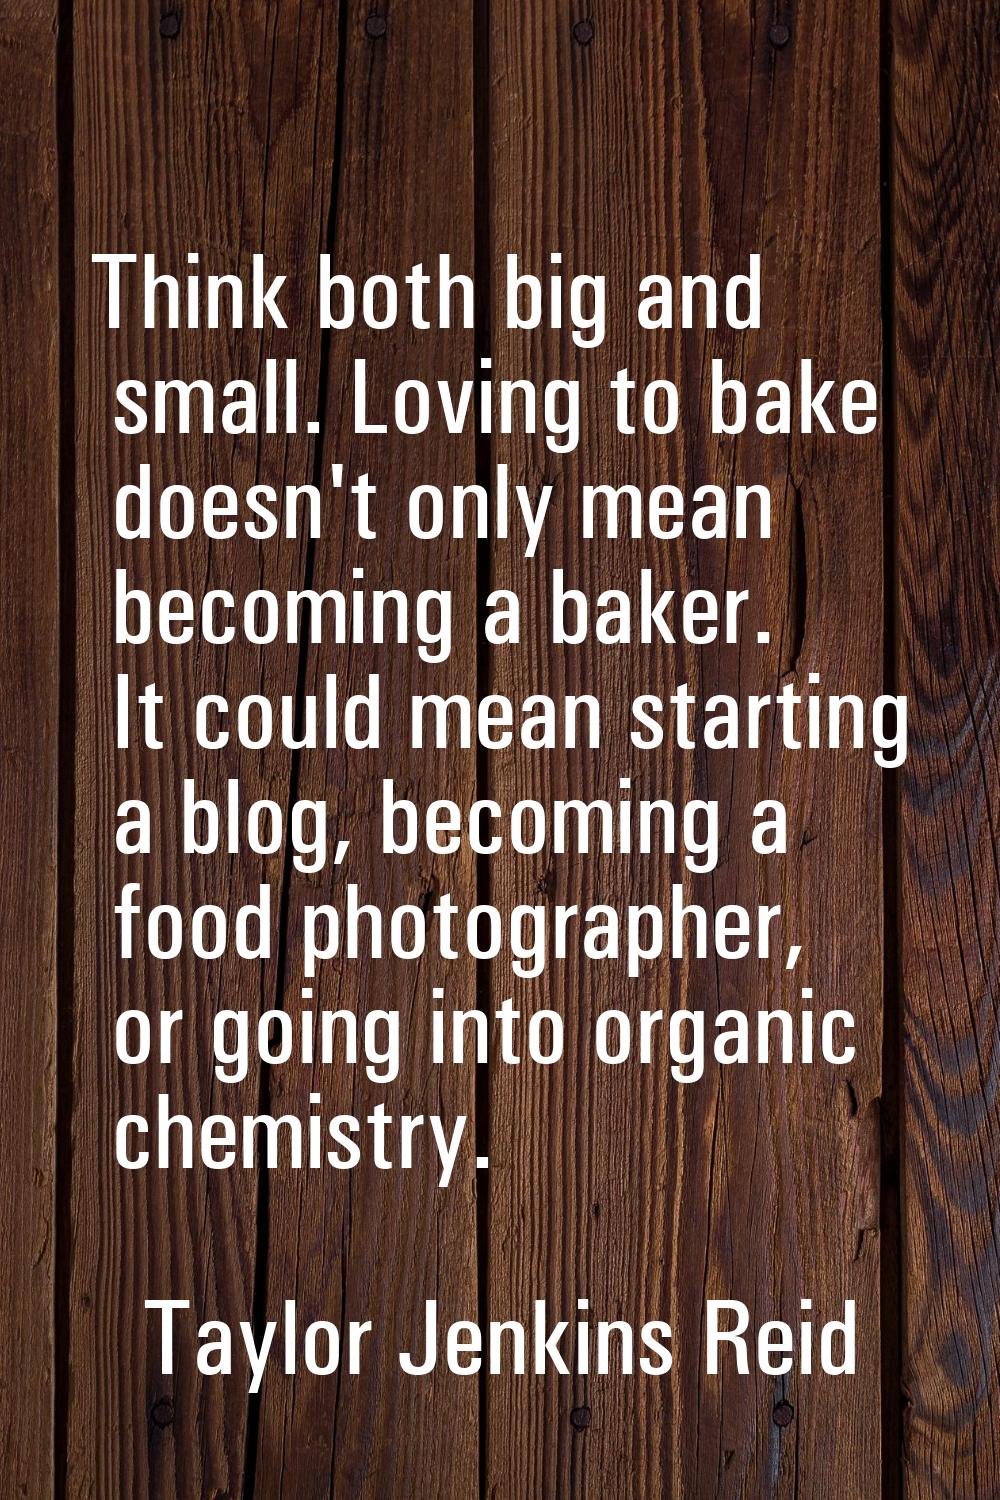 Think both big and small. Loving to bake doesn't only mean becoming a baker. It could mean starting